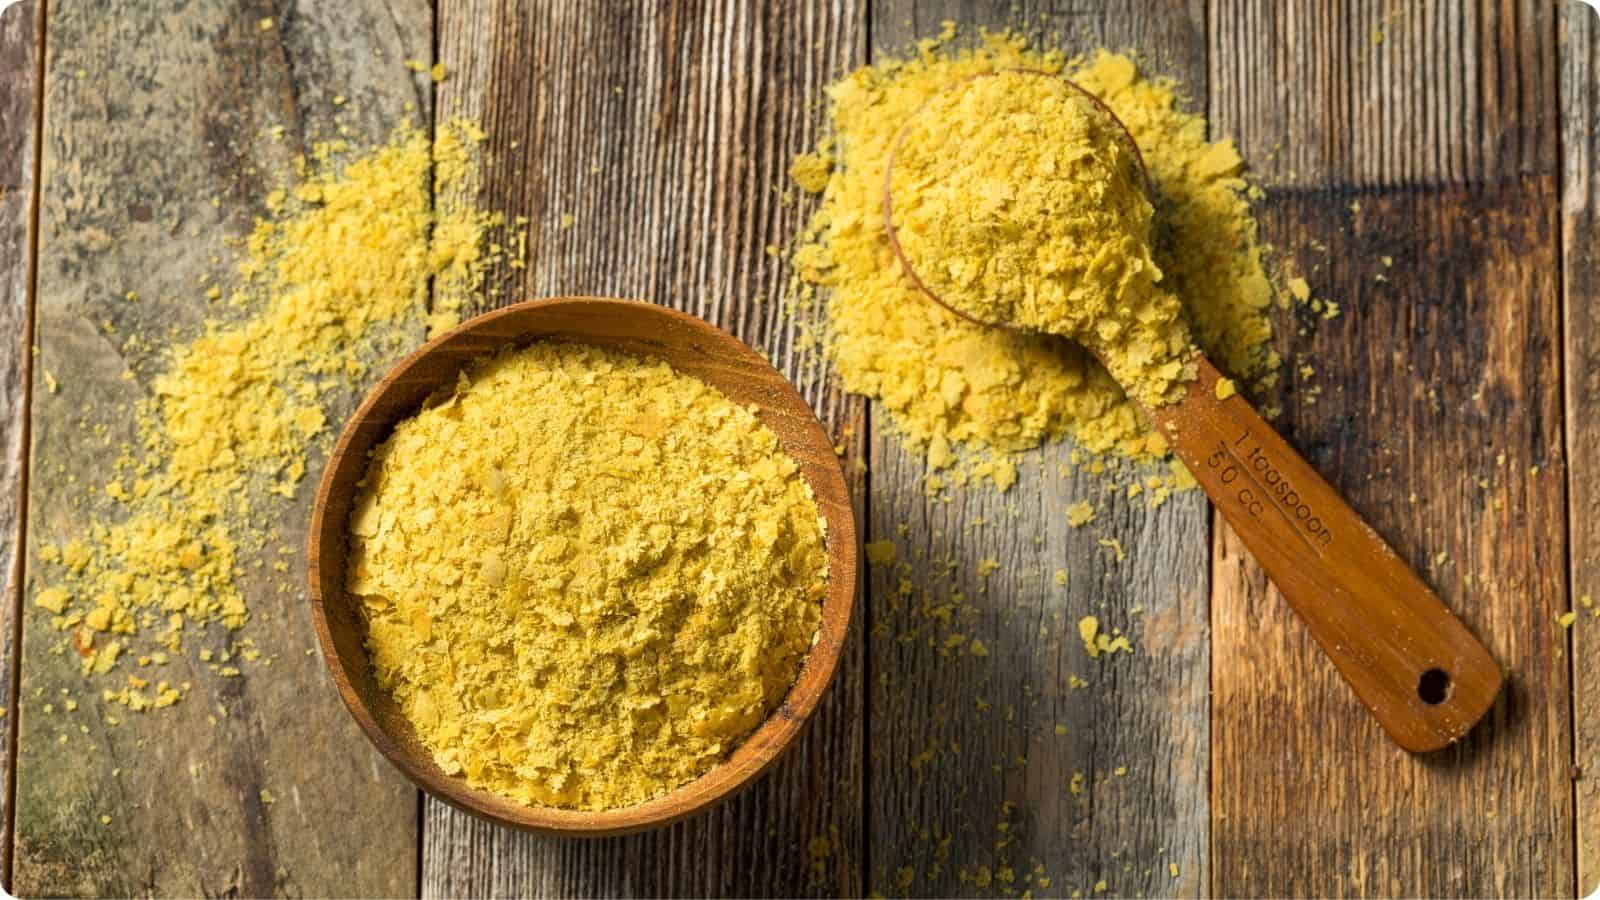 Overflowing bowl of yellow raw organic nutritional yeast with a scoop full on a wooden table.⁣⁣⁣⁣